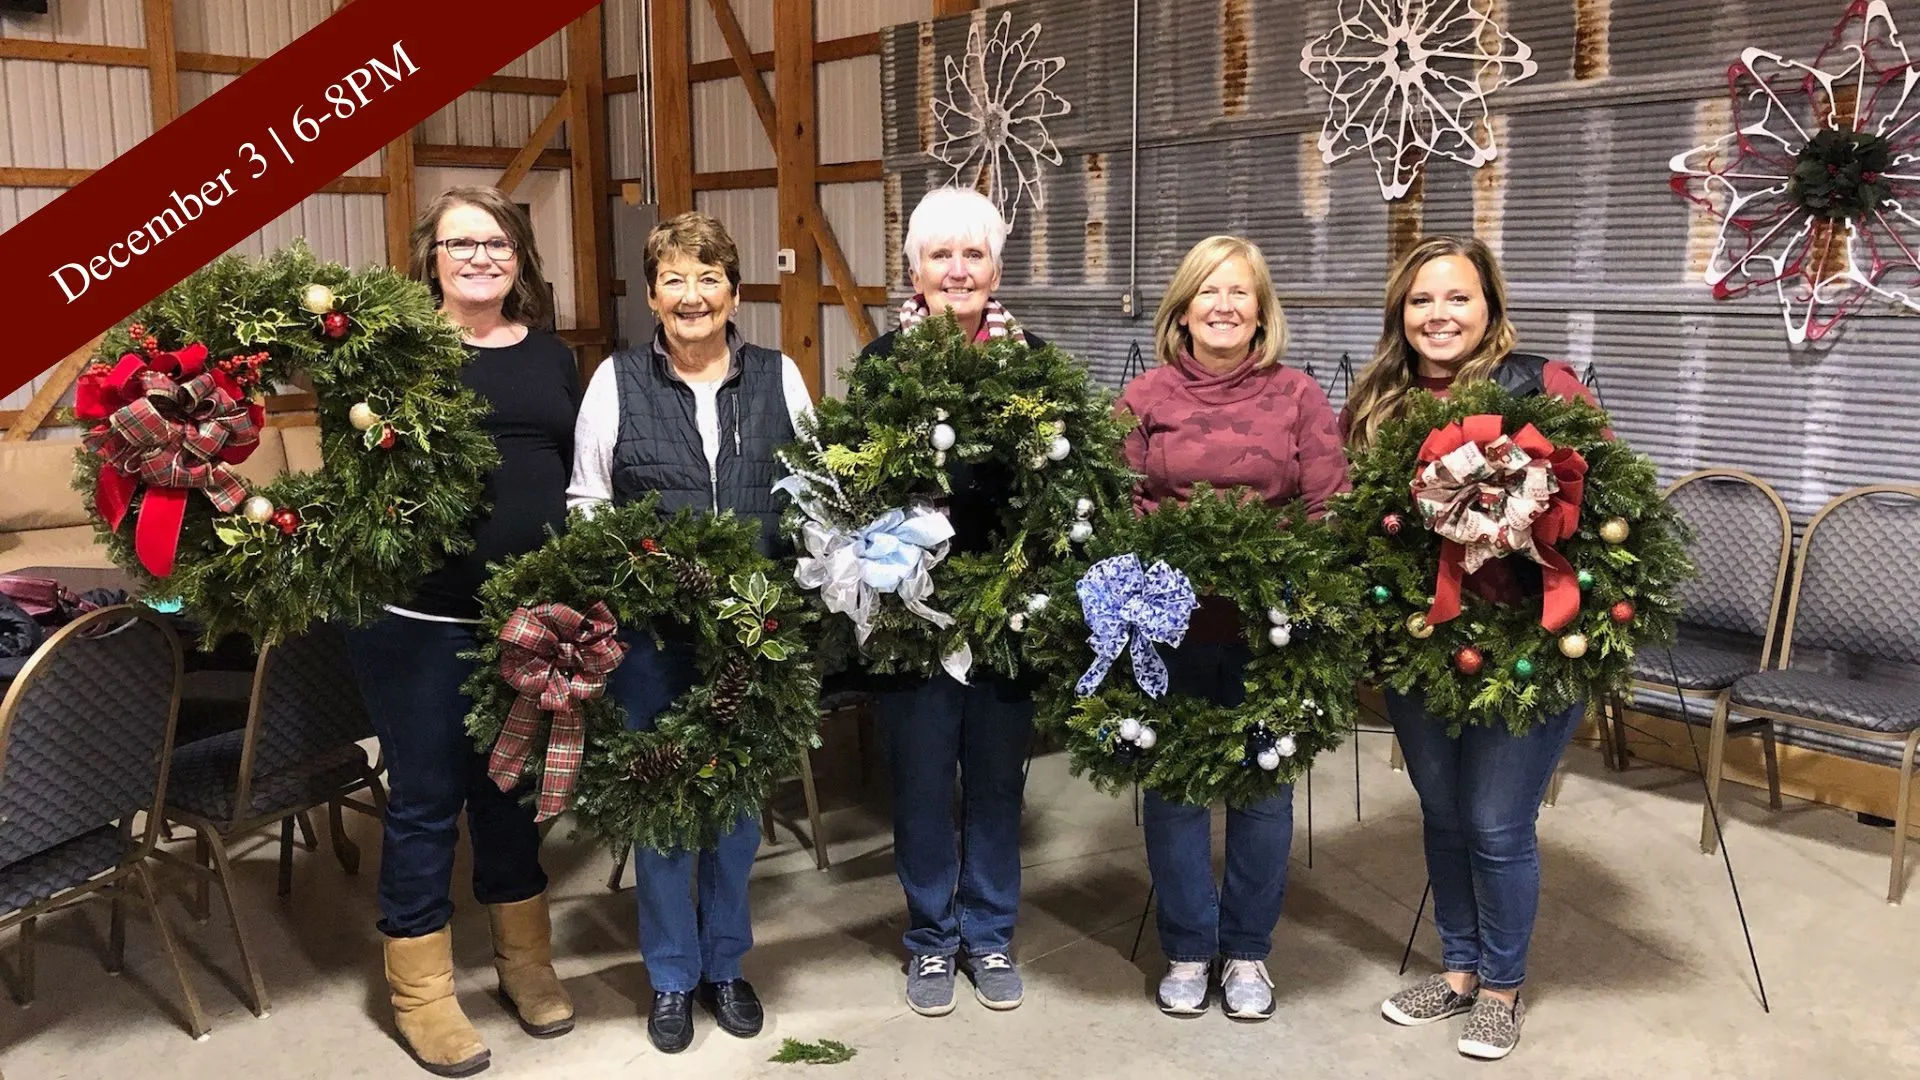 December 3 wreath and wine event